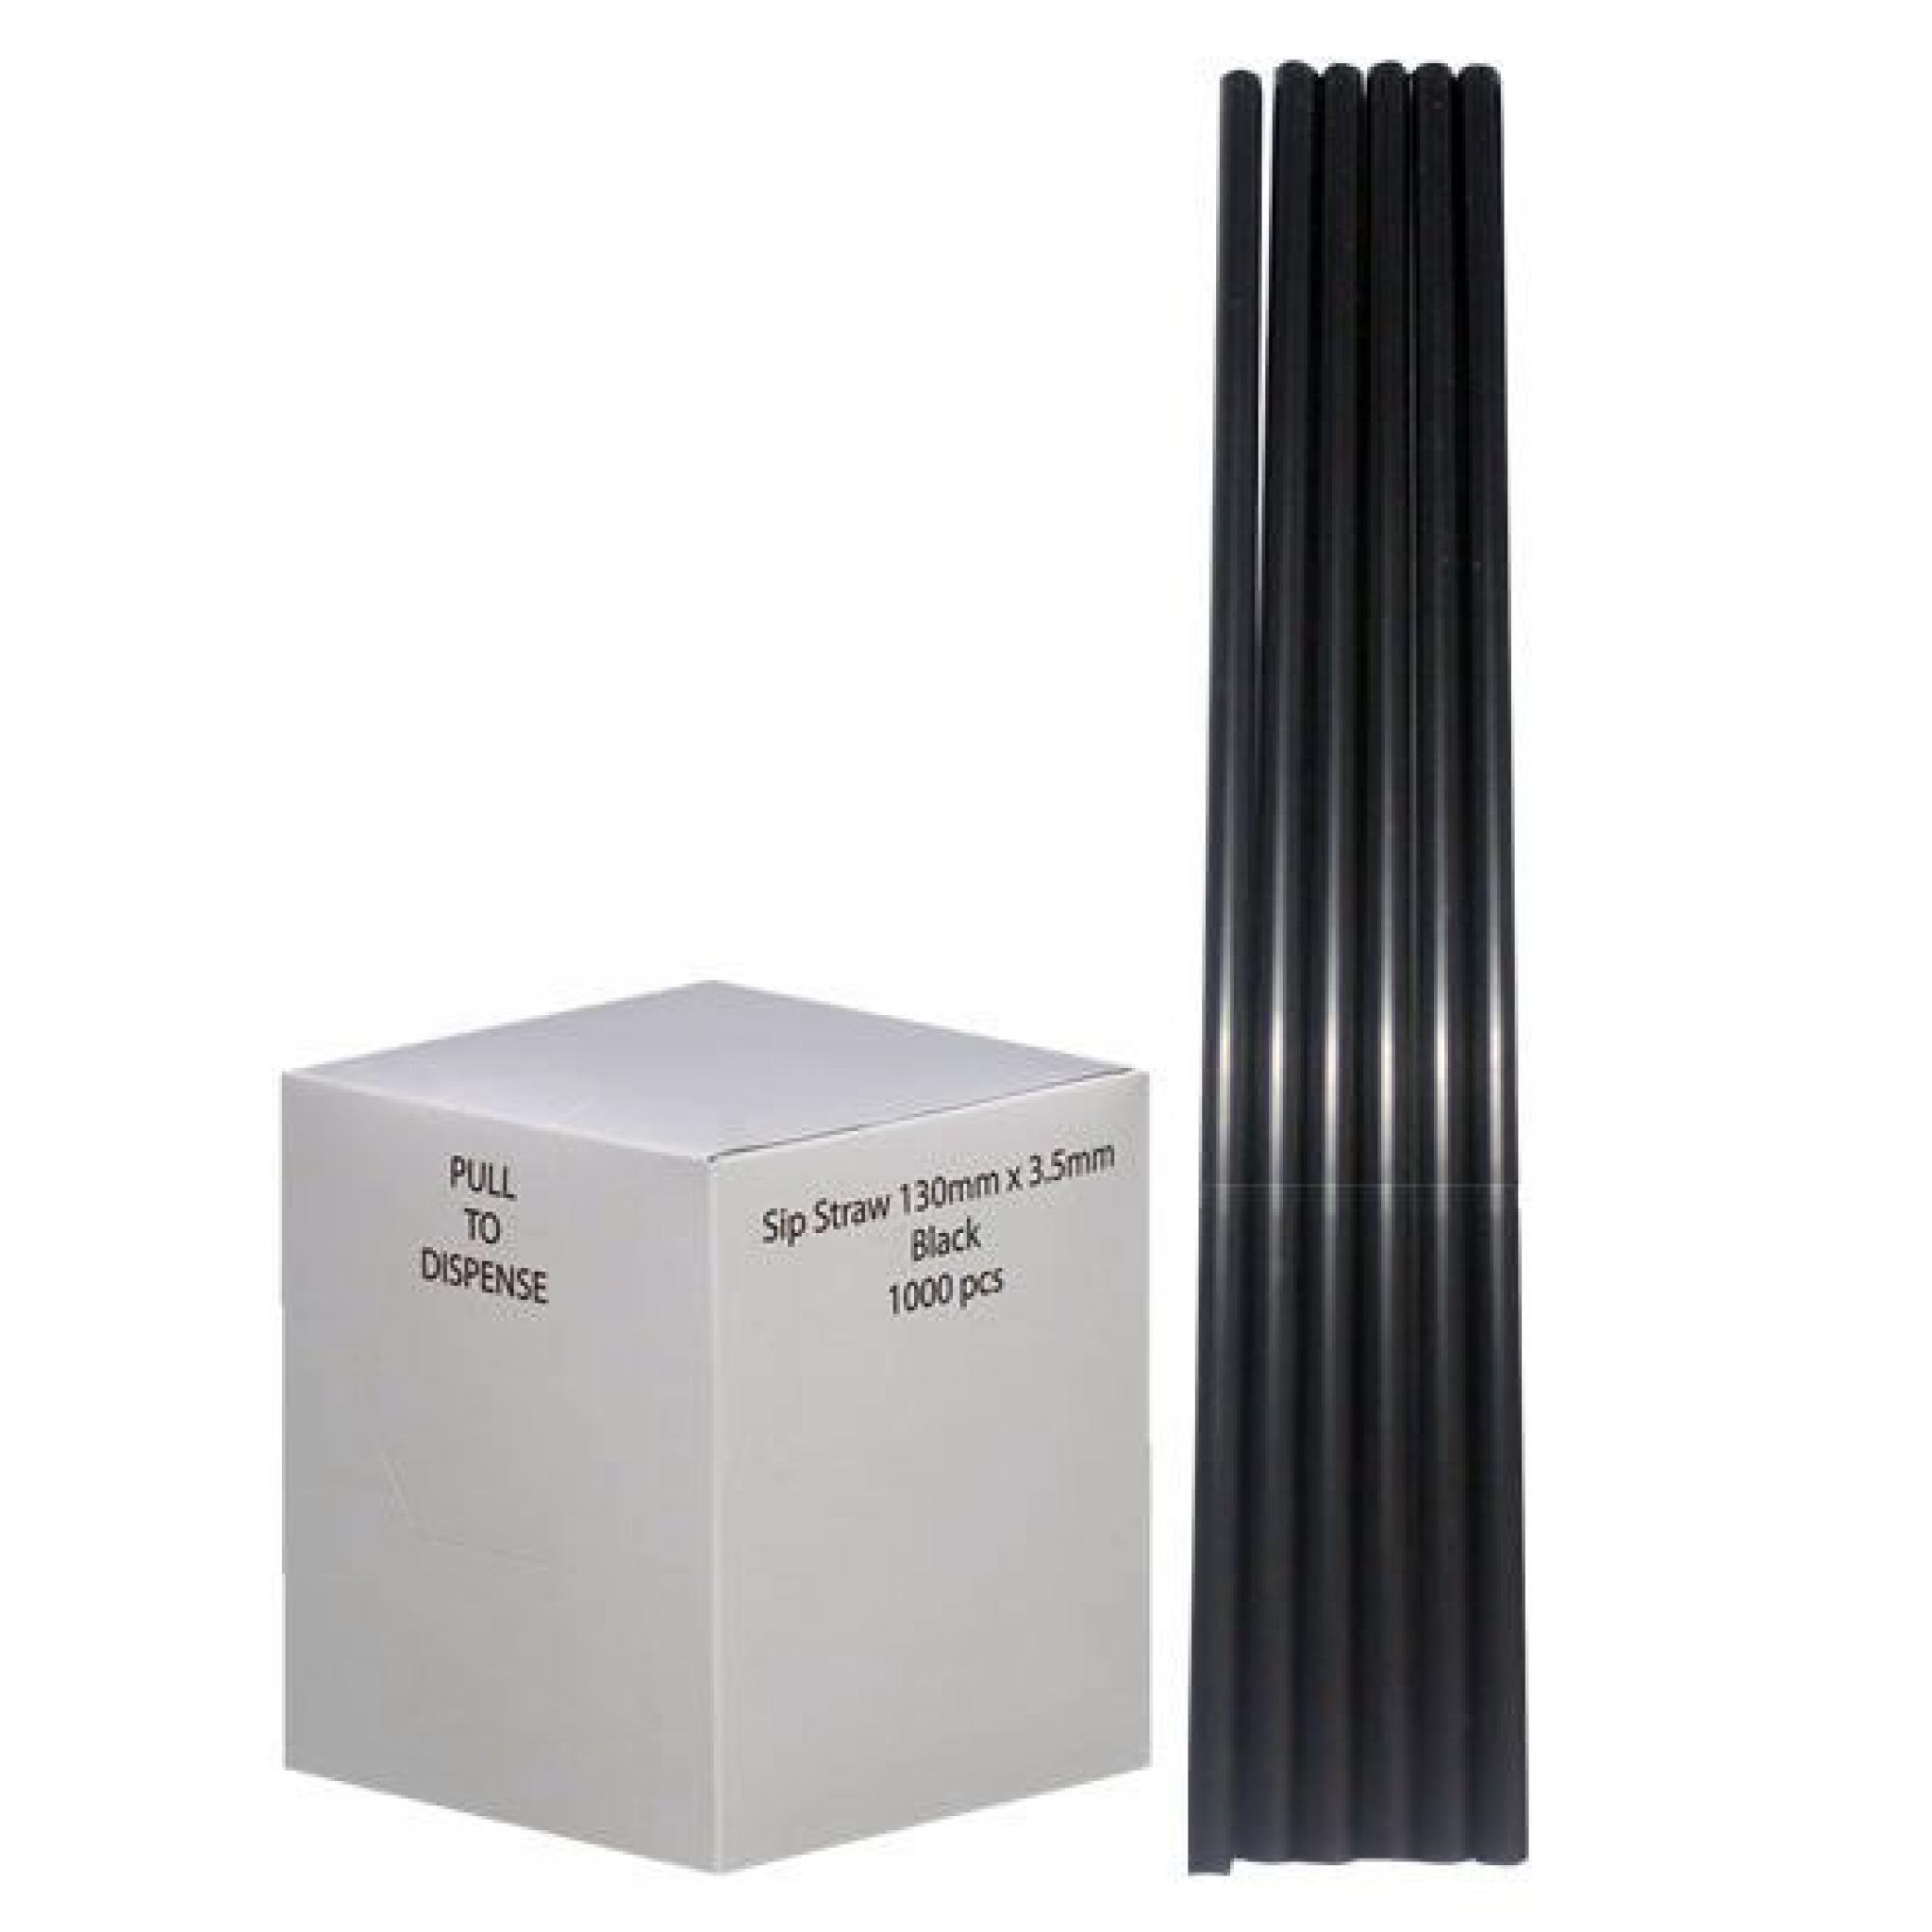 Box of 200 Super Smoothie Straw 200mm x 9mm Clear Smoothie Straws Jumbo Smoothie Straw Plastic Straws 200 pcs